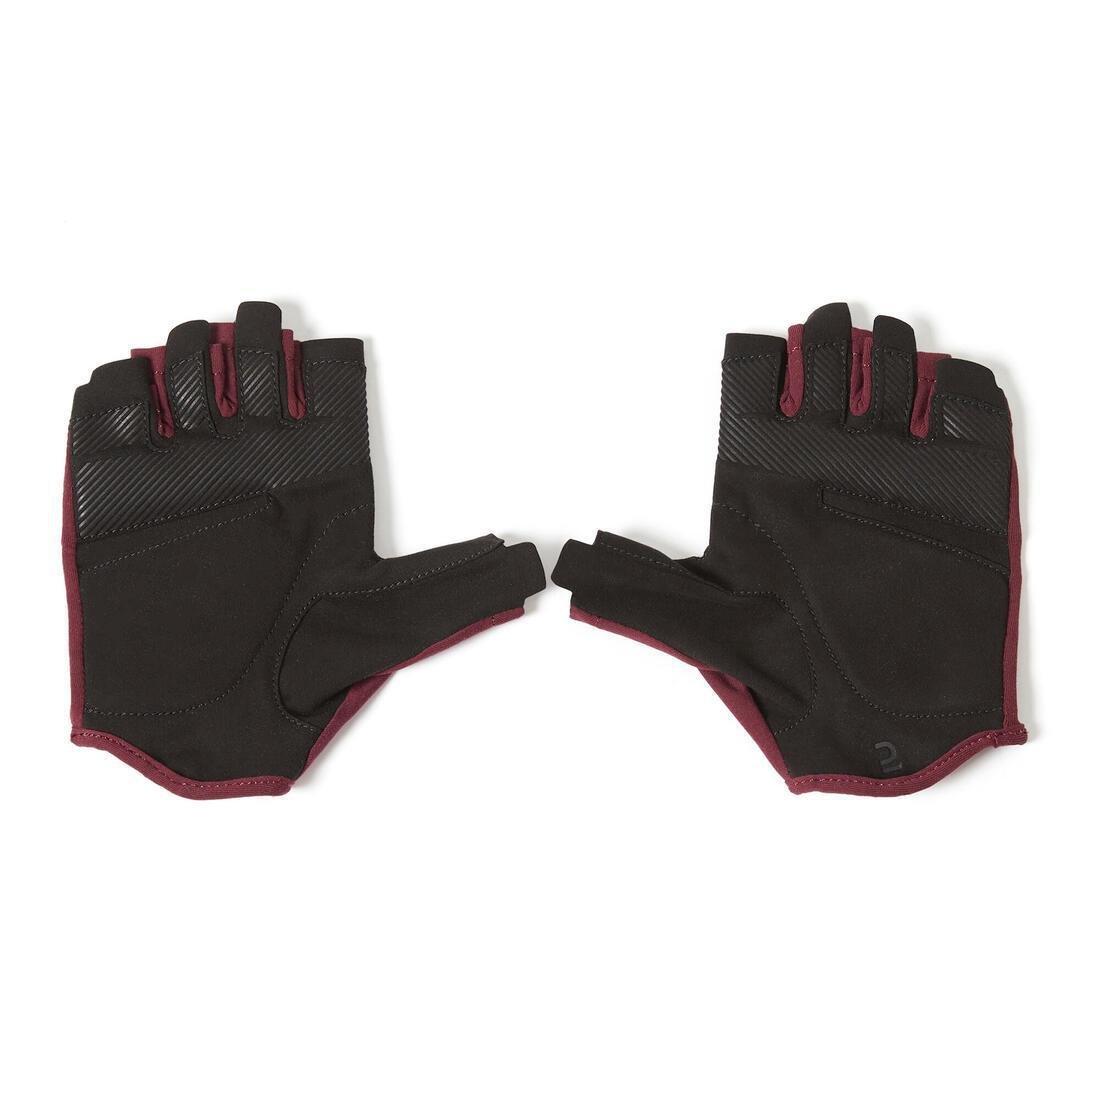 DOMYOS - Women's Ventilated Weight Training Gloves, Carbon grey